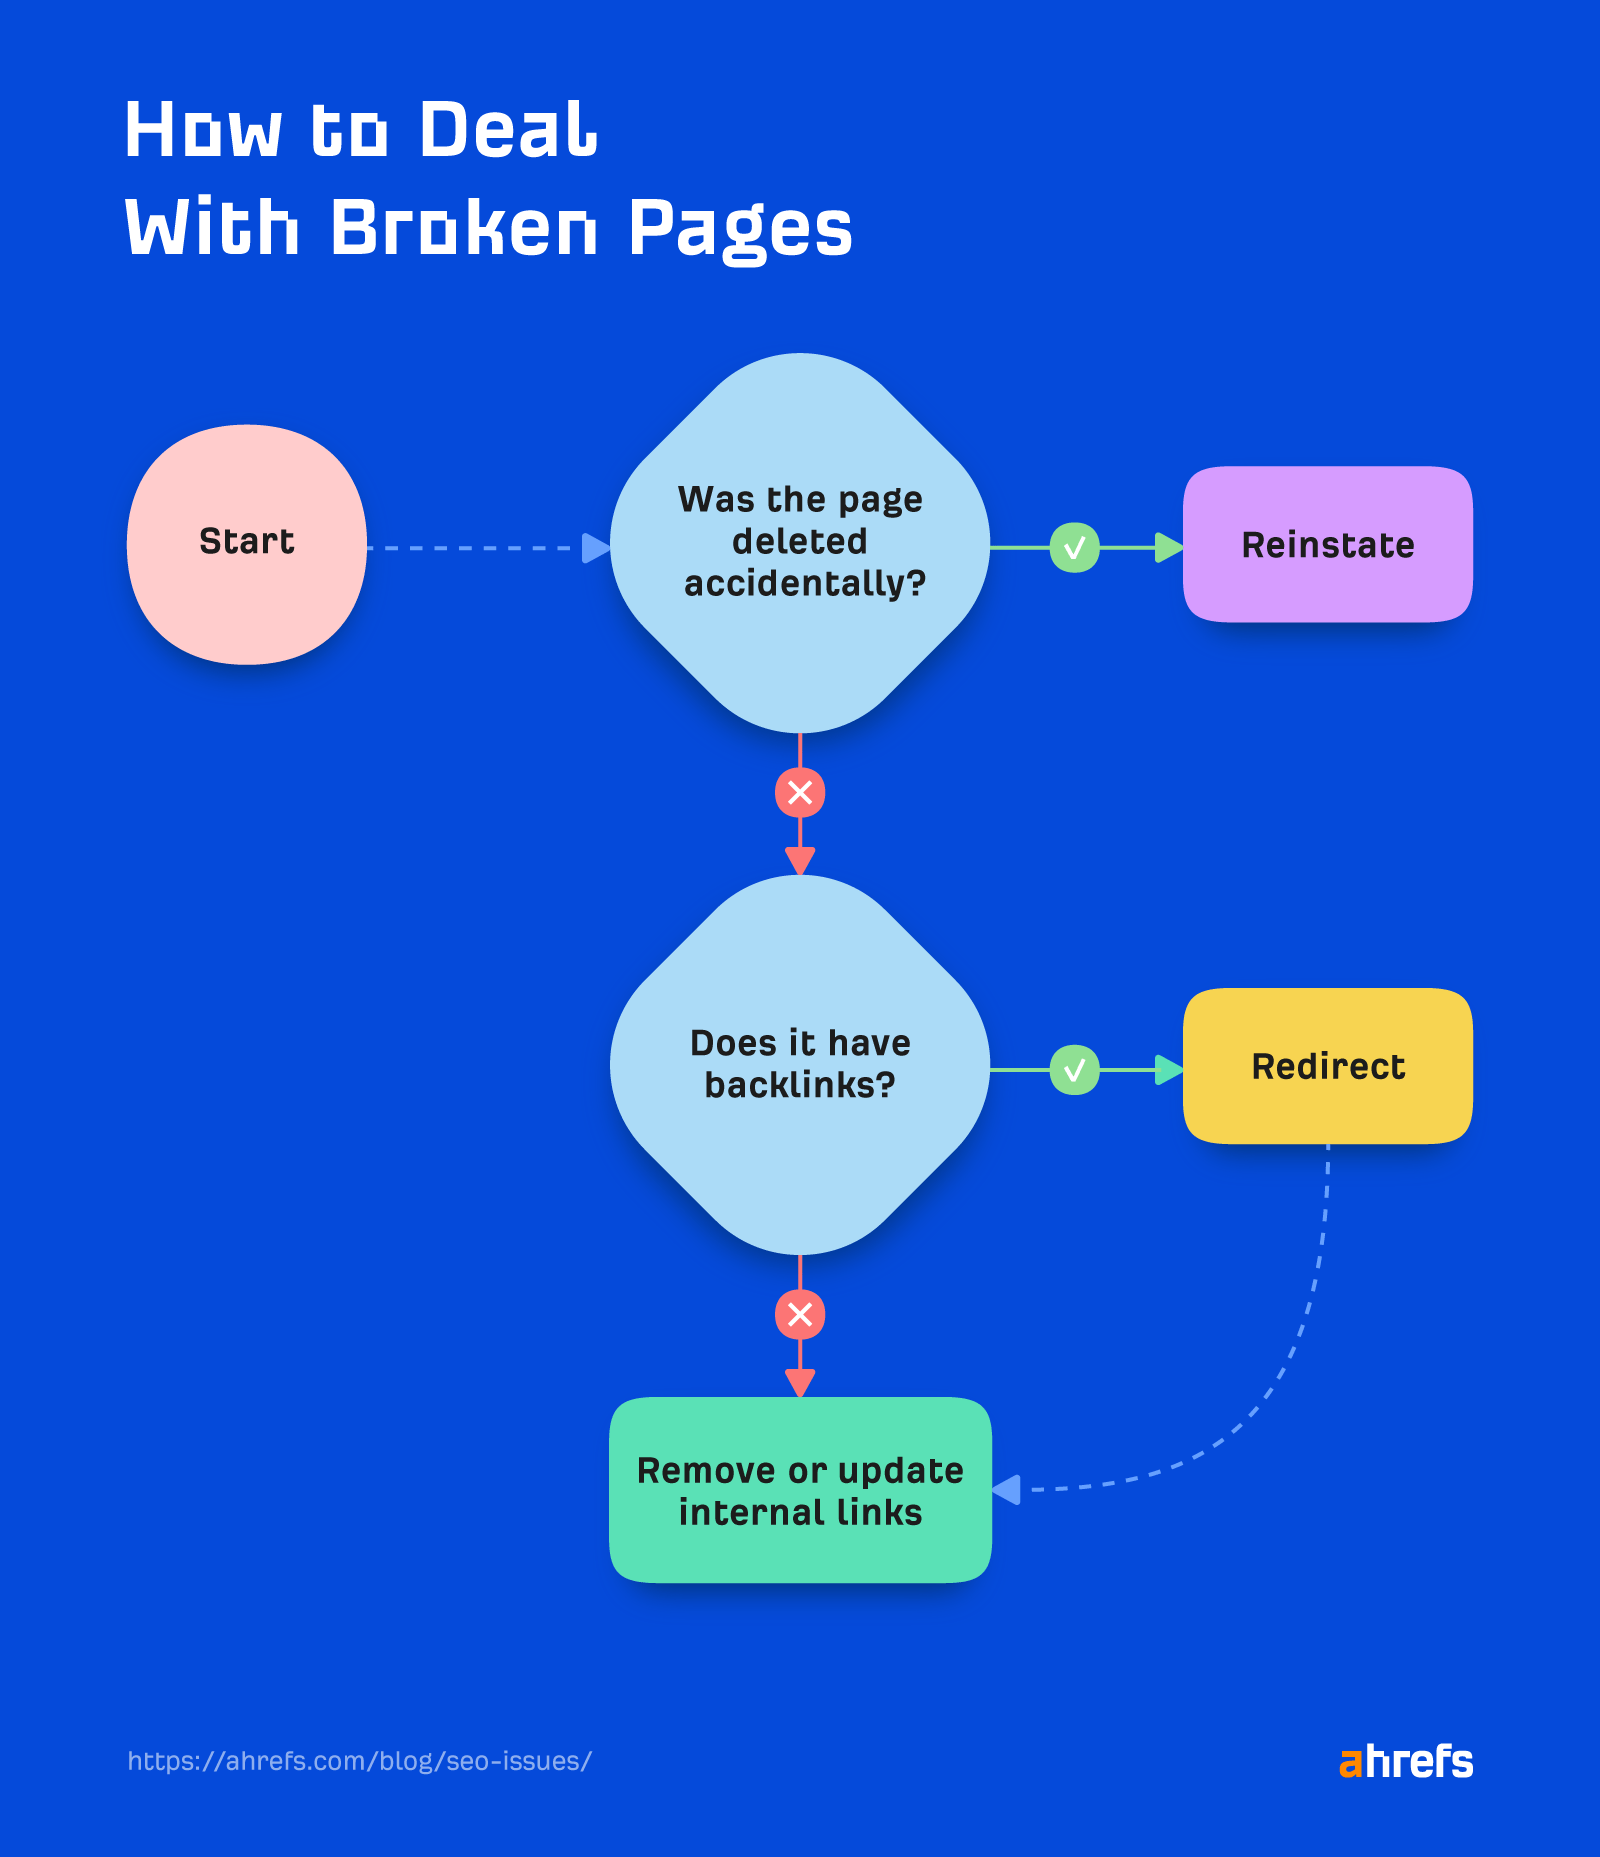 How to deal with broken pages